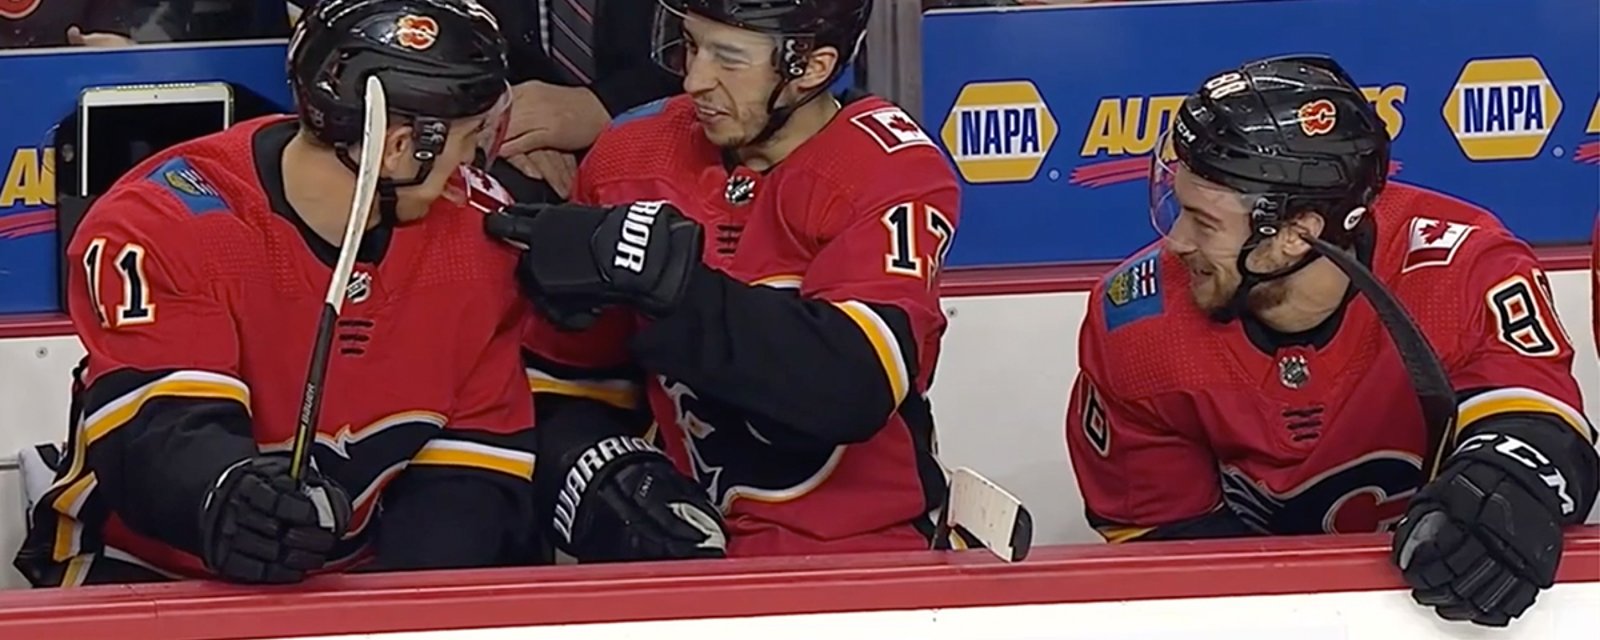 Johnny Gaudreau channels his inner Oprah on the Flames bench.